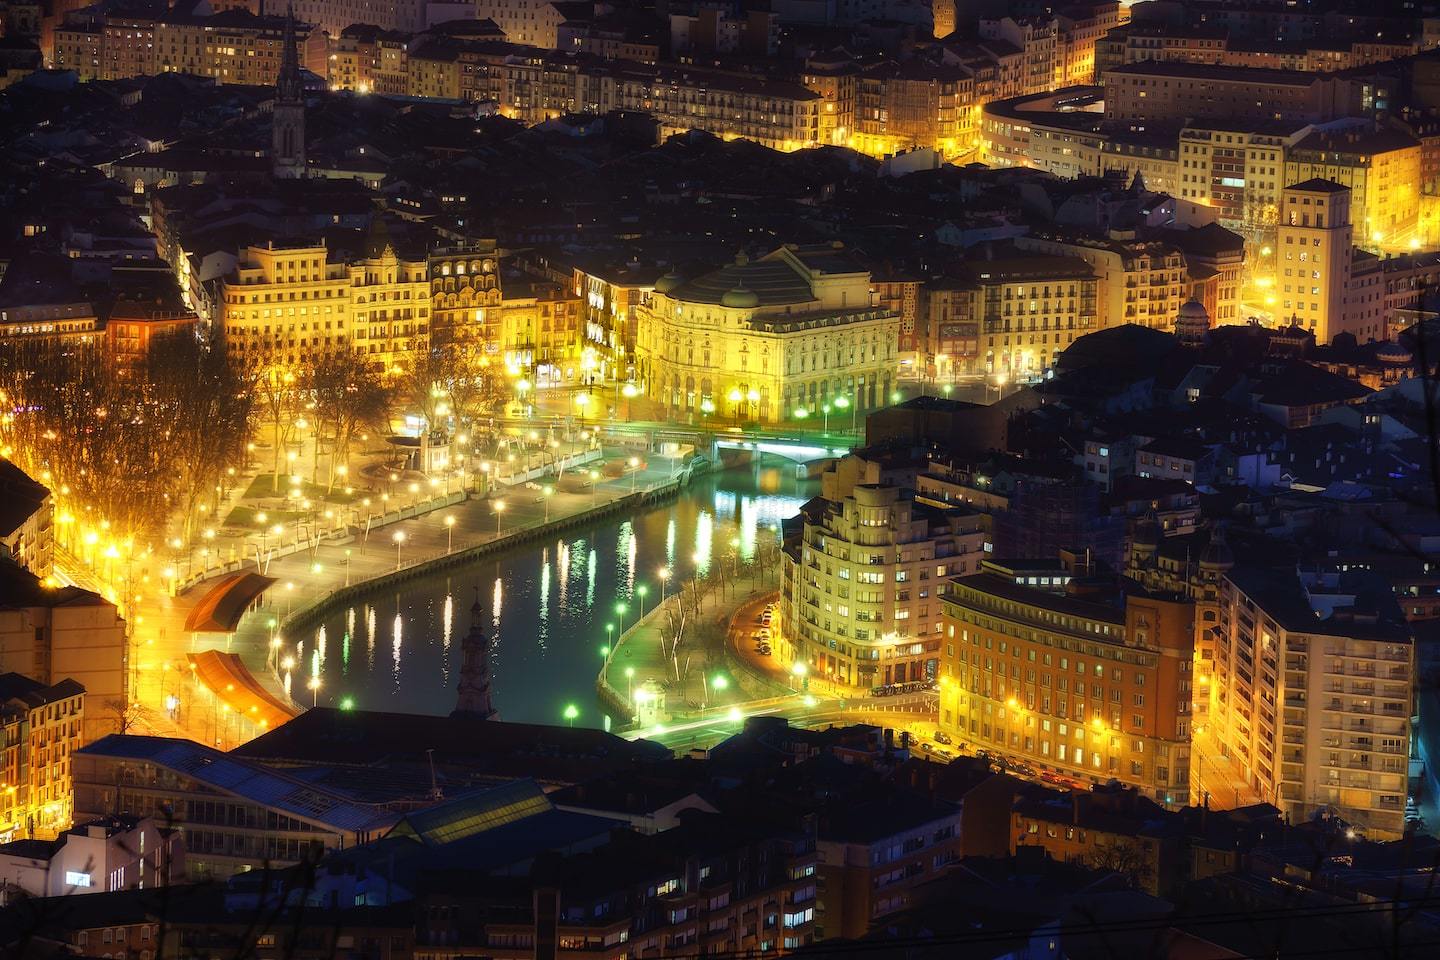 Aerial view of Bilbao at night with buildings lit up around the river